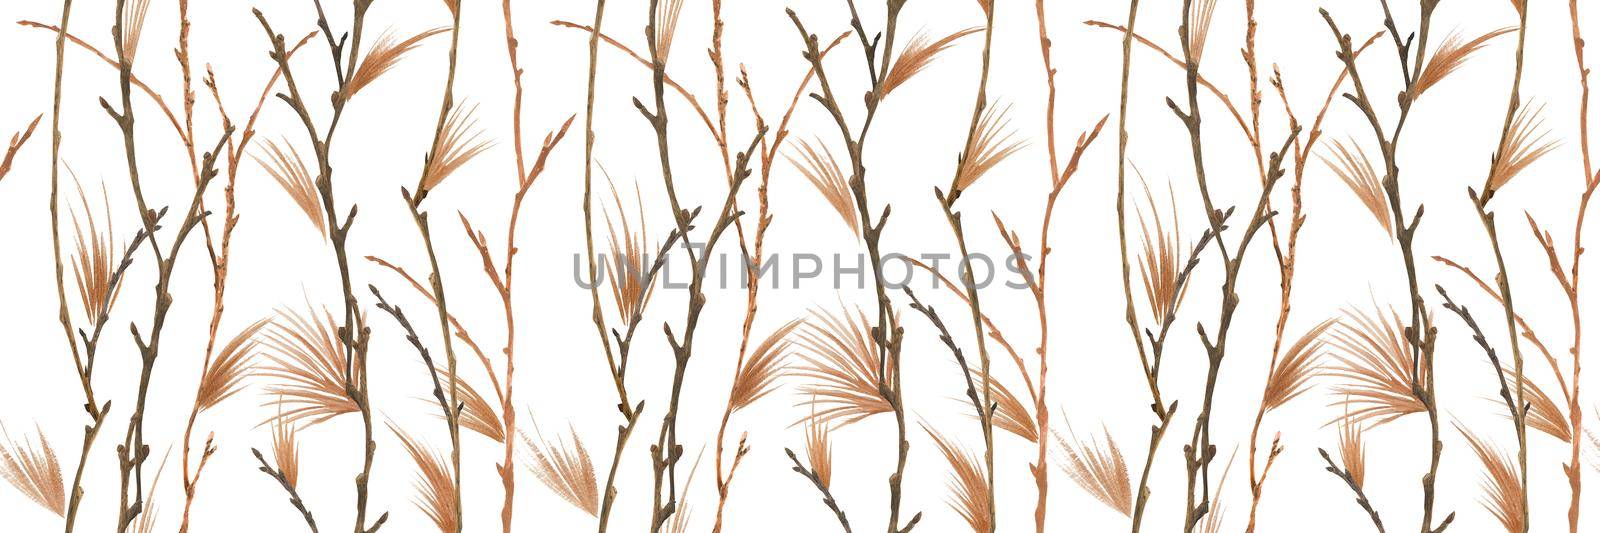 Botanical watercolor. Gold and branches. Wood seamless pattern for Christmas textile and web design